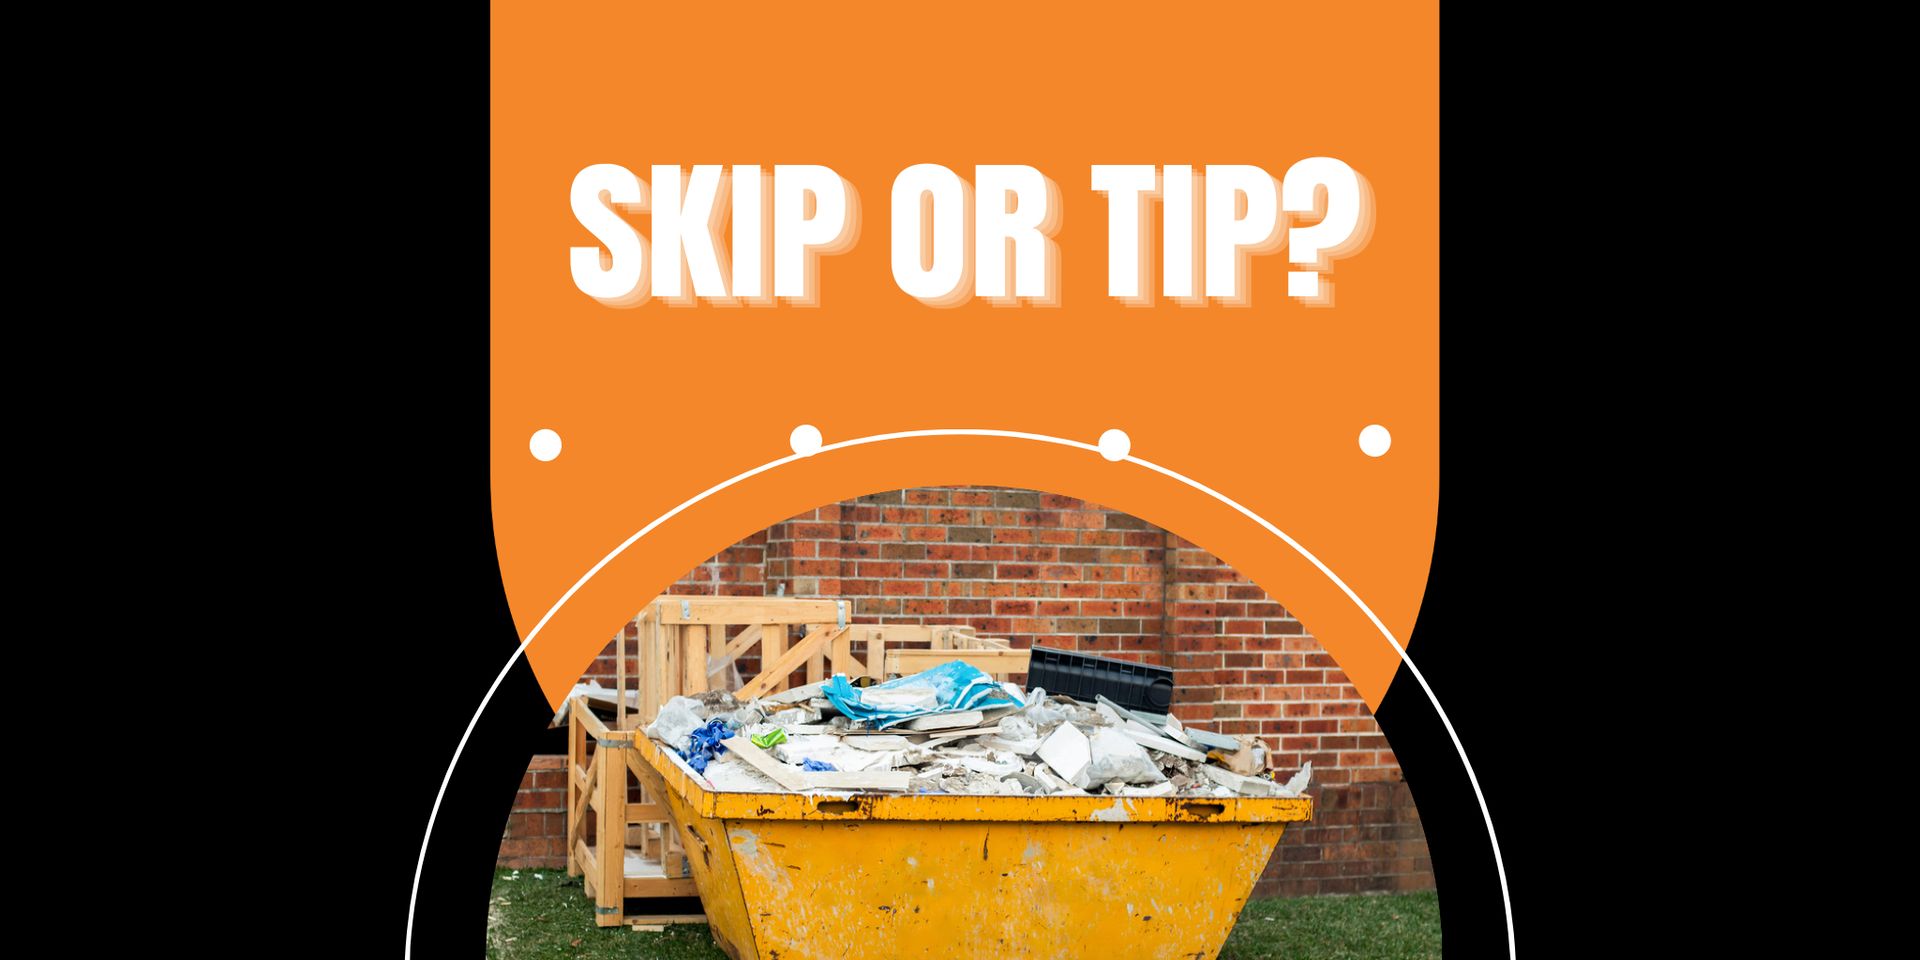 Why Would I Need a Skip? Is Taking Rubbish to the Tip More Cost-Effective